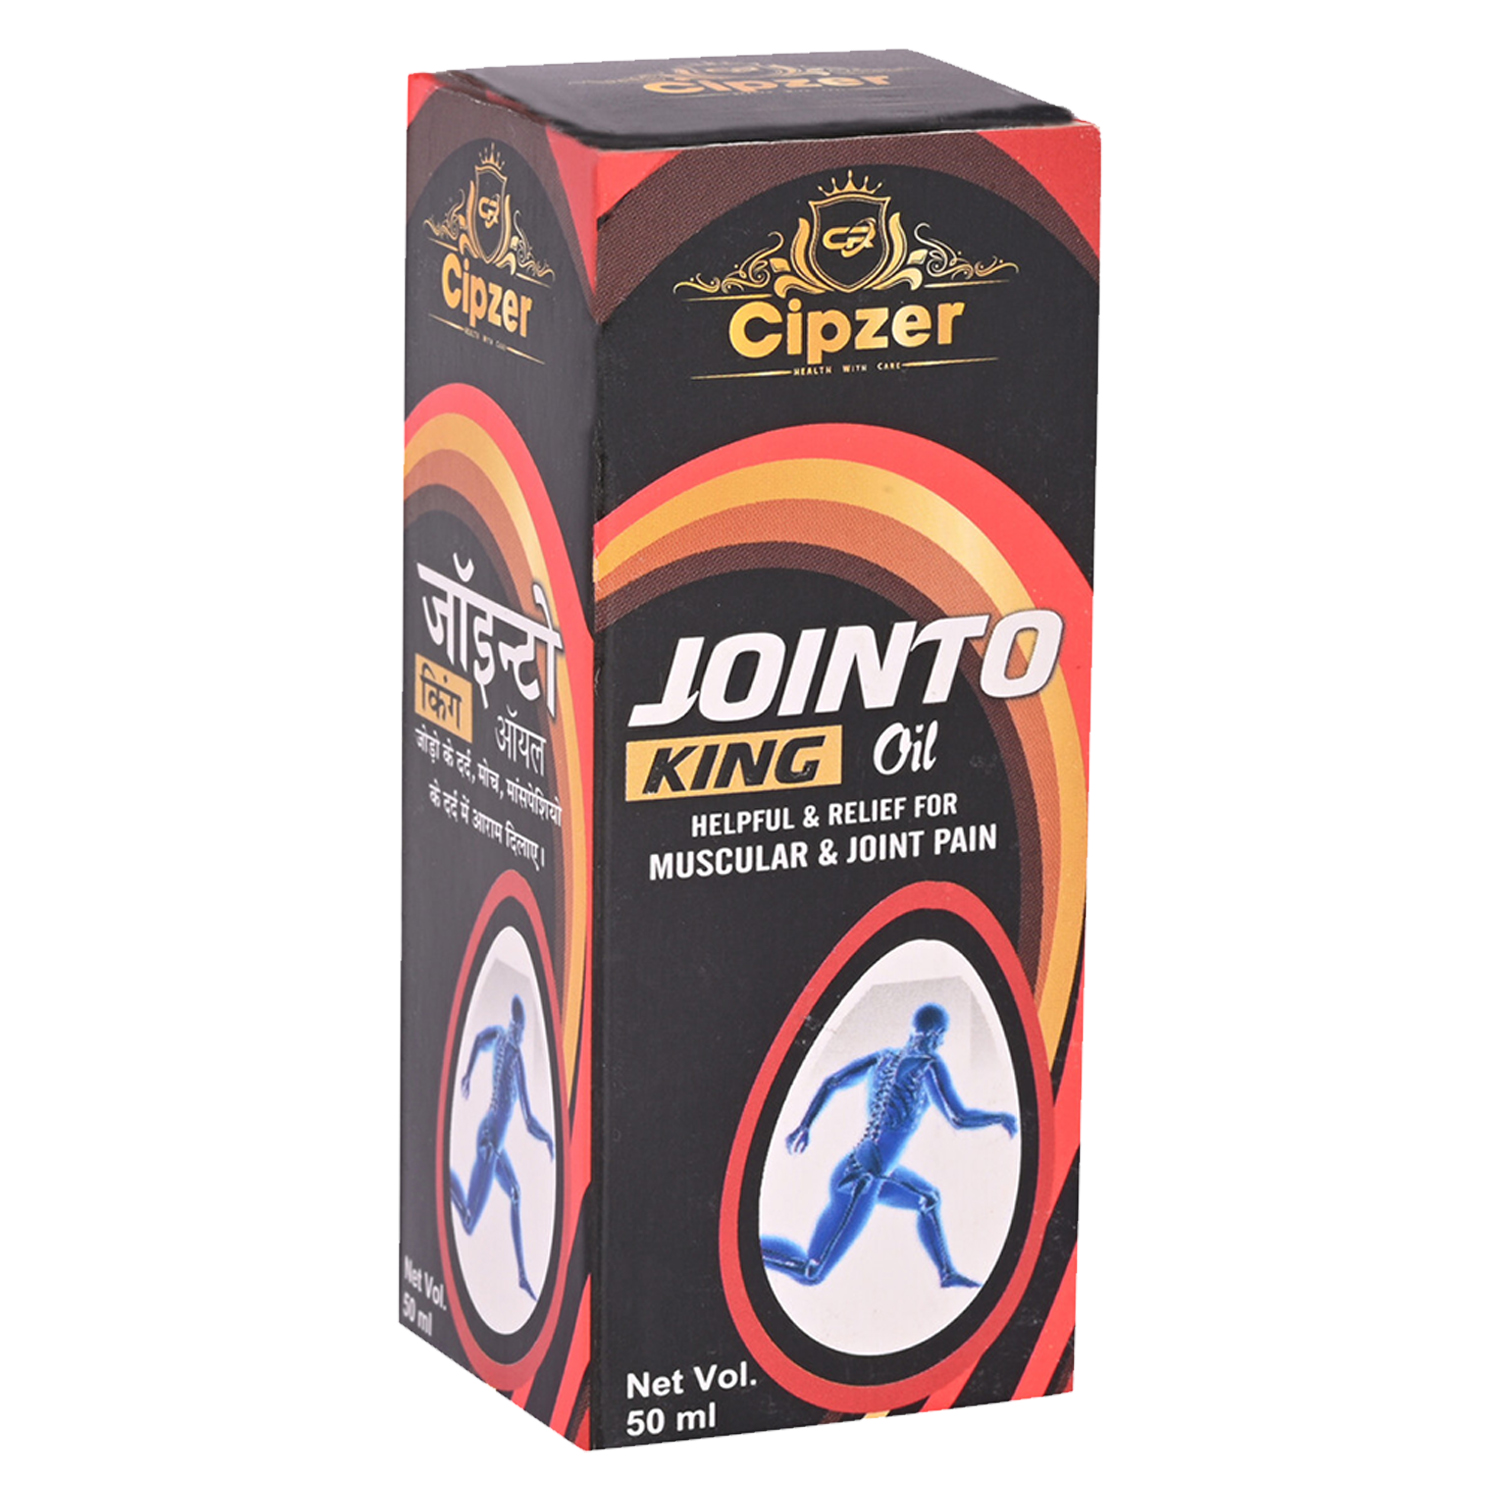 Cipzer Jointo King Oil